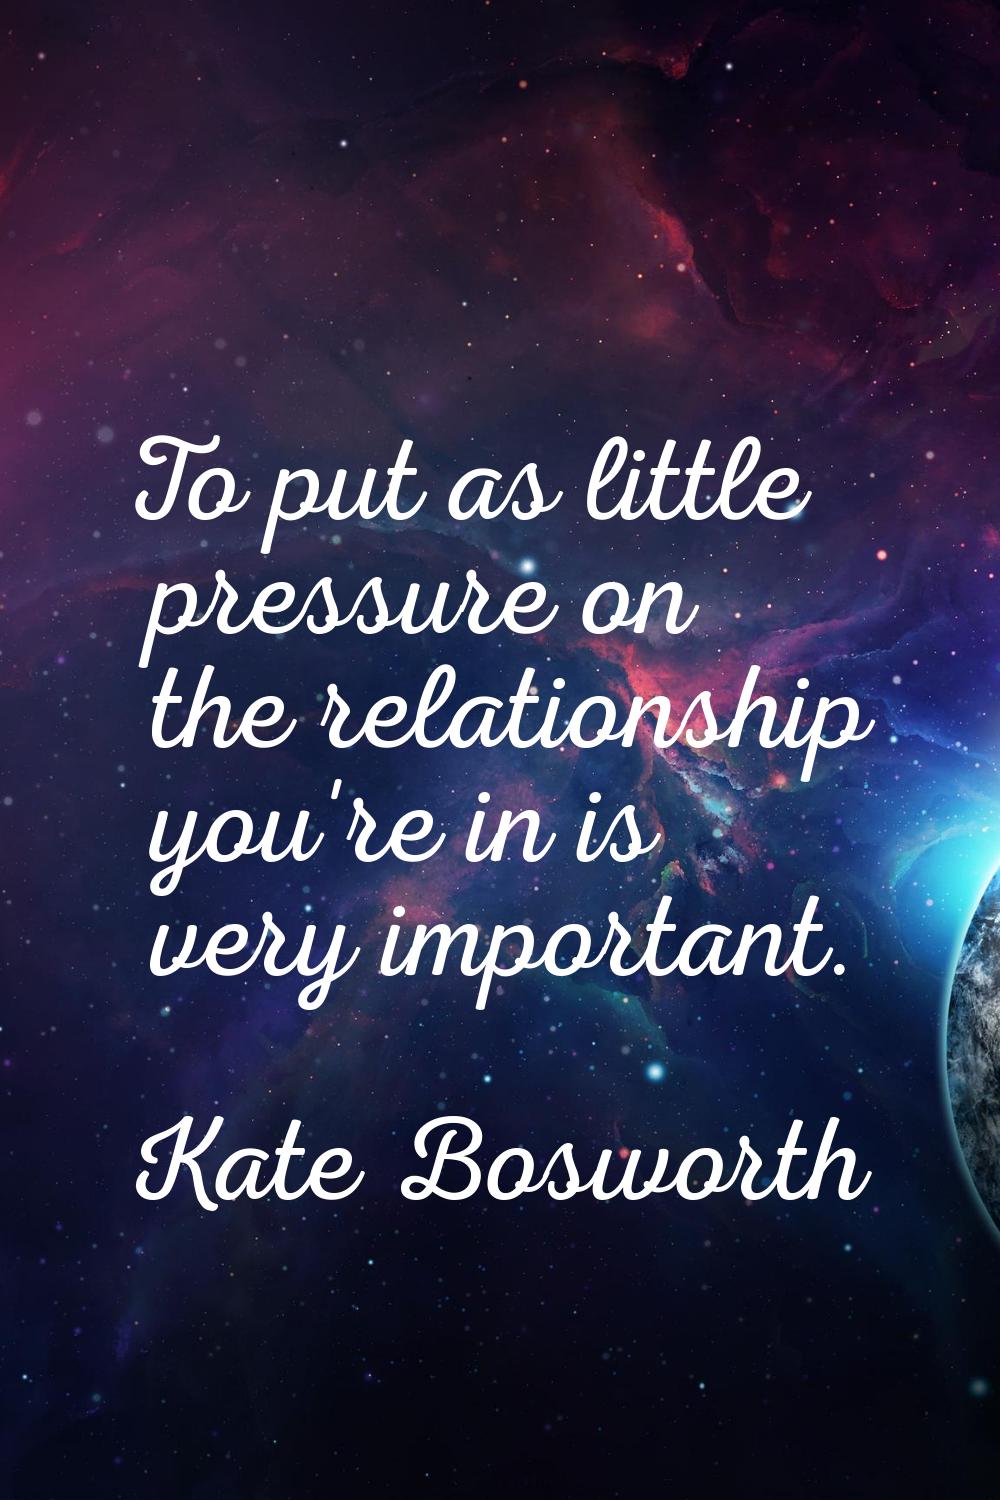 To put as little pressure on the relationship you're in is very important.